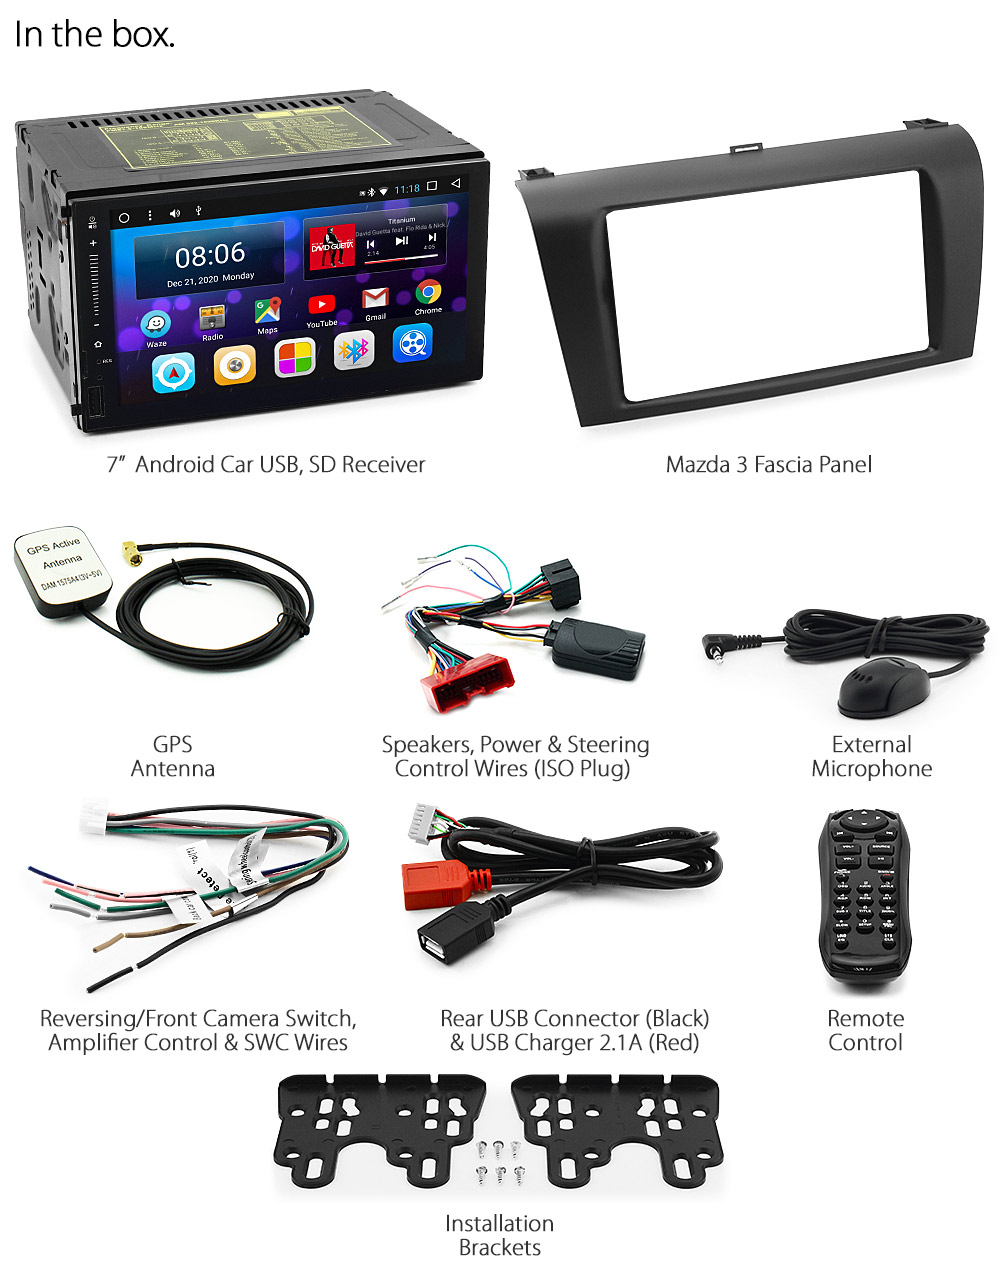 M310AND GPS Aftermarket Mazda3 Mazda 3 1st Generation BK1 BK2 BK Series 1 2 Gen Year 2003 2004 2005 2006 2007 7-inch Double-DIN Original Android 7.1 Nougat car USB Charger 2.1A SD player radio stereo head unit details Aftermarket External and Internal Microphone Bluetooth Europe Sat Nav Navi Plug and Play ISO Plug Wiring Harness Matching Fascia Kit Facia Free Reversing Camera Album Art ID3 Tag RMVB MP3 MP4 AVI MKV Full High Definition FHD AirPlay Air Play MirrorLink Mirror Link 1080p DAB+ Digital Radio DAB + Double DIN tunez tunezmart BOSE audio system Patch Lead Steering Wheel Control Compatible SWC CTSMZ004.2 Connects2